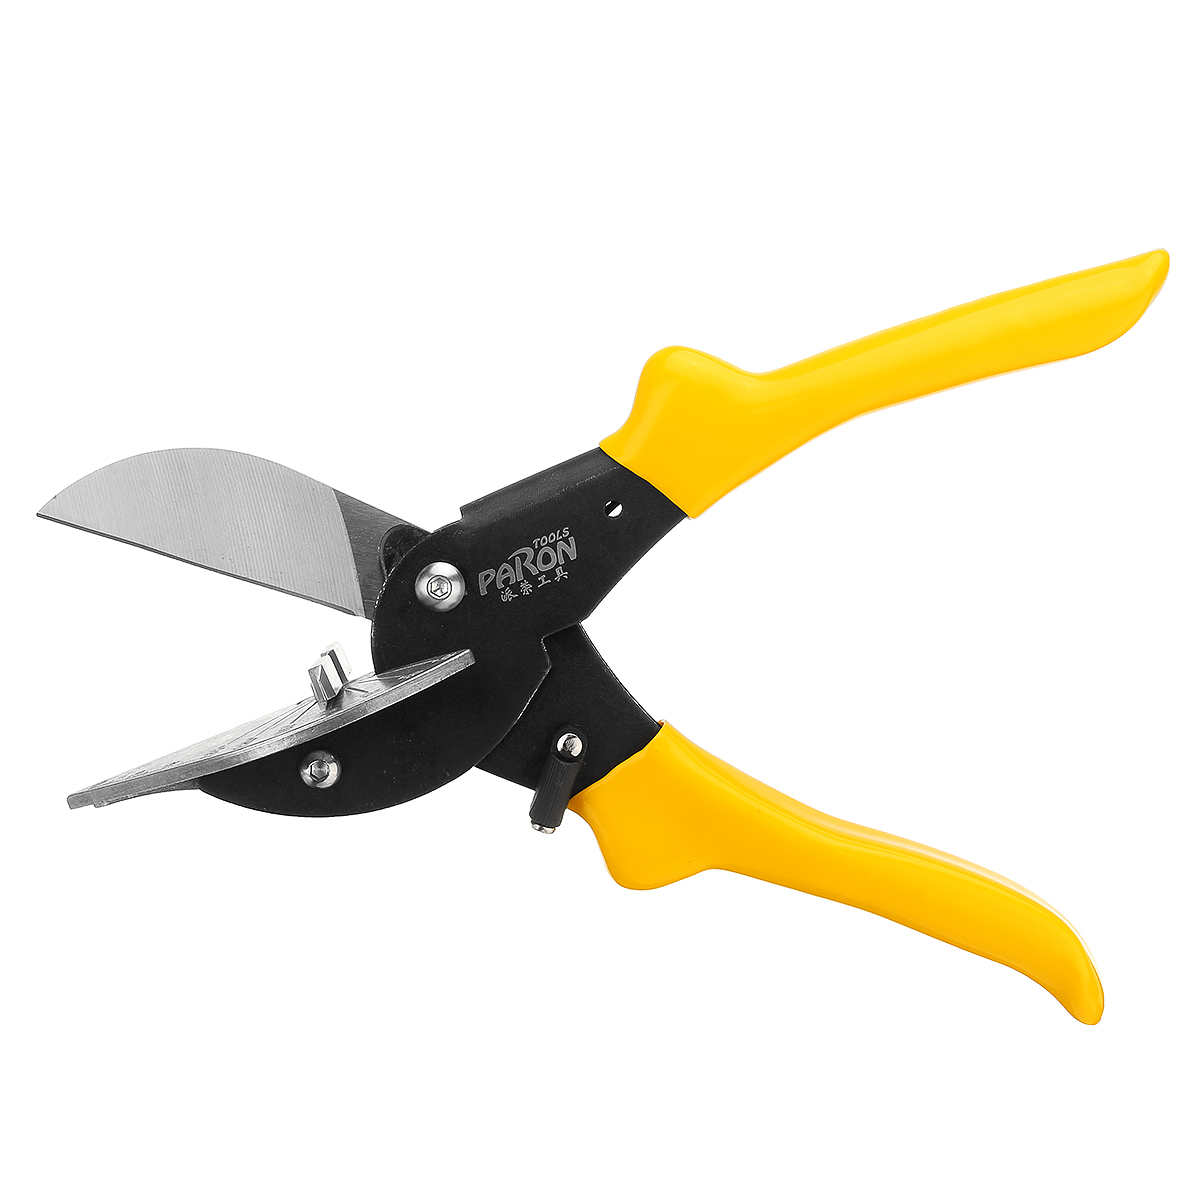 Find Paron JX C8025 45 135 Adjustable Universal Angle Cutter Mitre Shear with Blades Screwdriver Tools for Sale on Gipsybee.com with cryptocurrencies